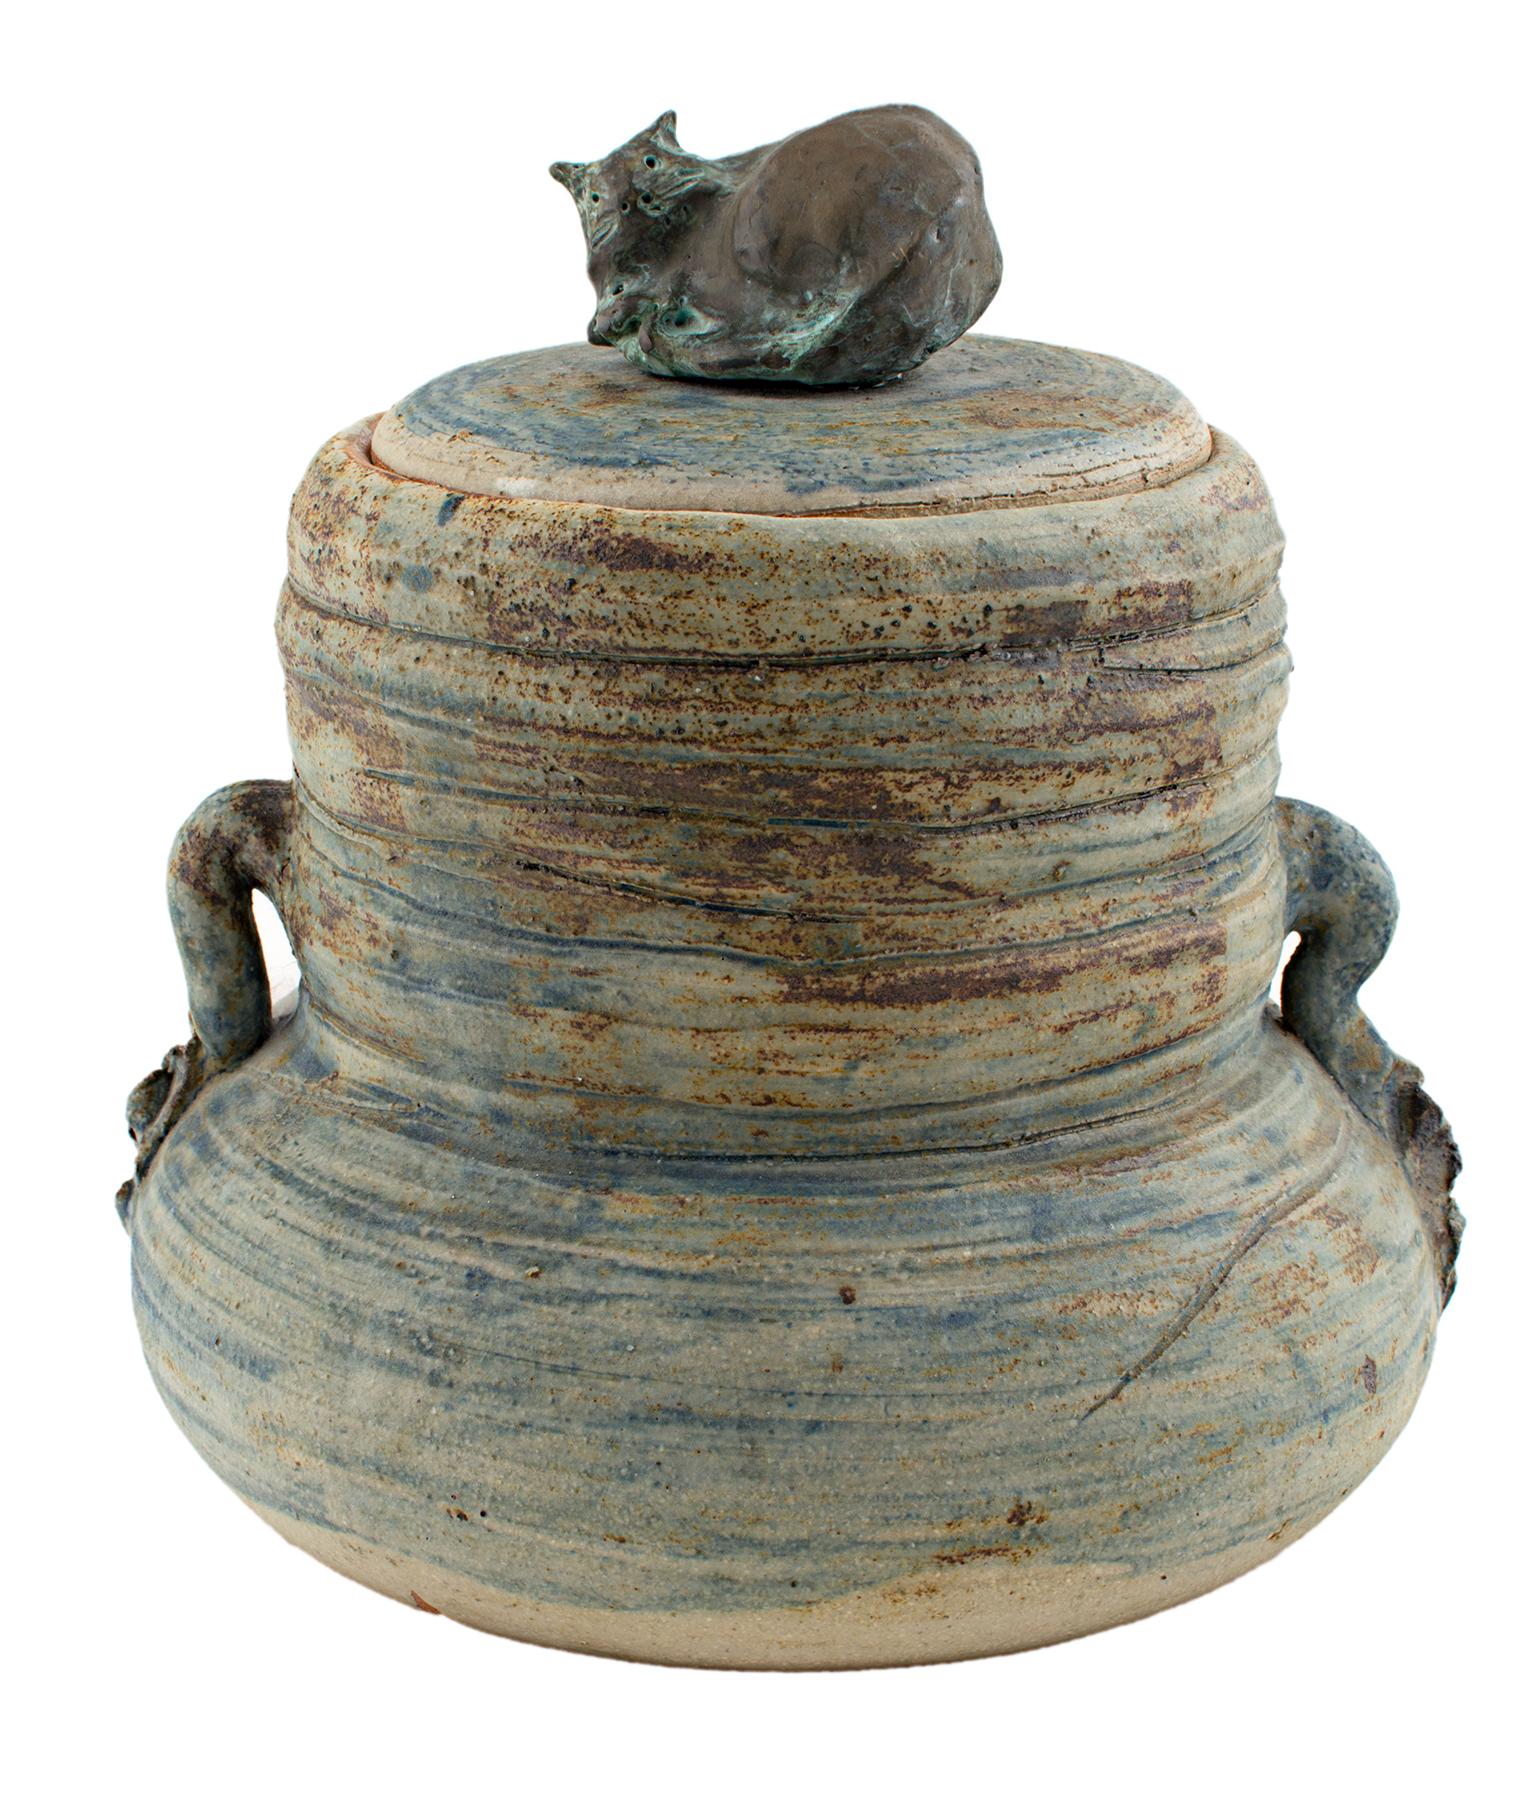 "Cover Jar w/ Cat" is a stoneware and bronze sculpture by Ernst Gramatzki. It features horizontal lines around the piece and a bronze cat on top of the vessel. 

7 1/2" x 7"

Ernst Gramatzki is a world renowned artist, sculptor, potter, painter and